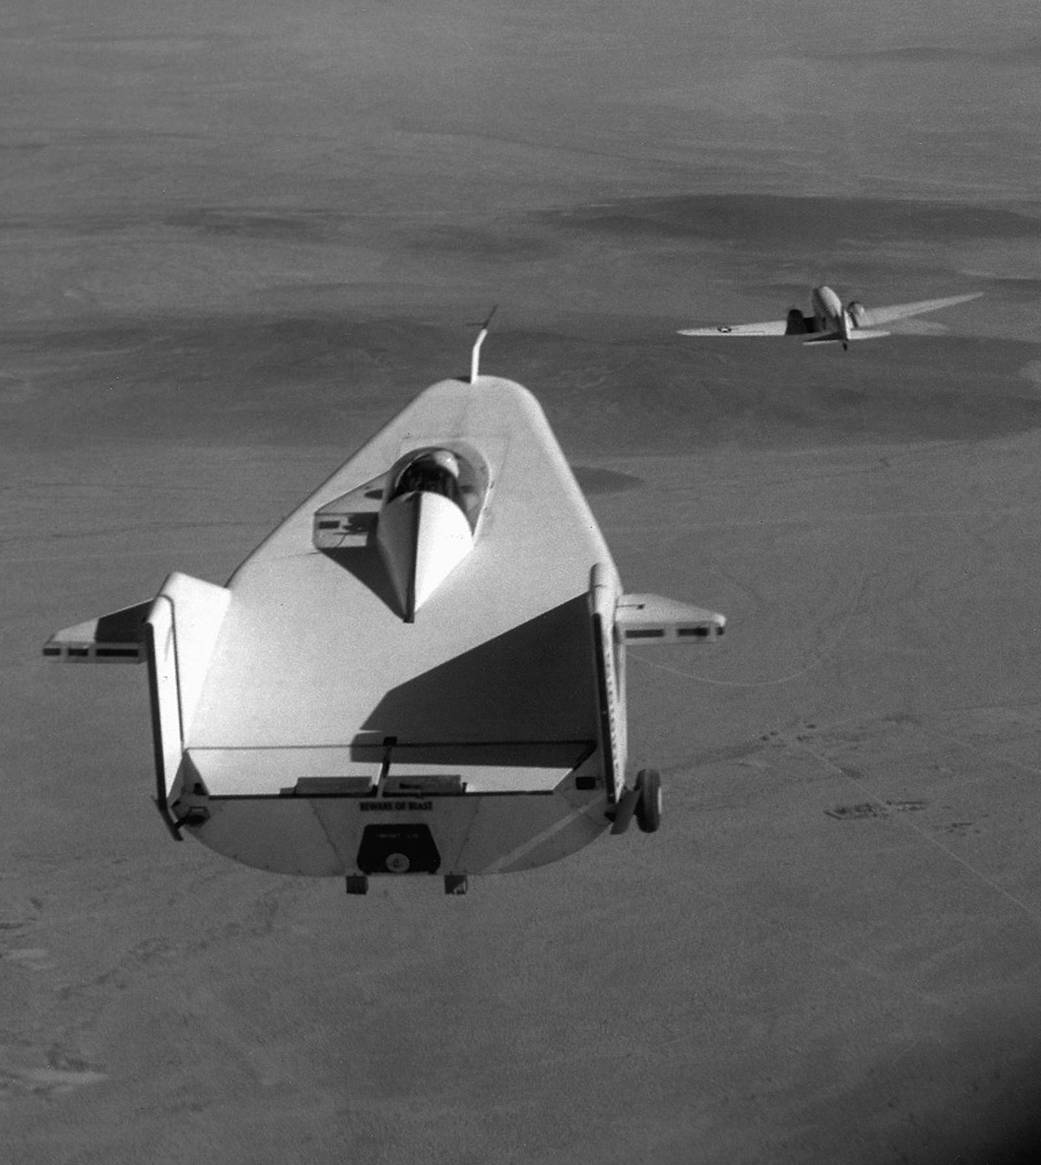 The M2-F1 Lifting Body is seen here being towed behind a C-47 at the Flight Research Center, Edwards, CA. 